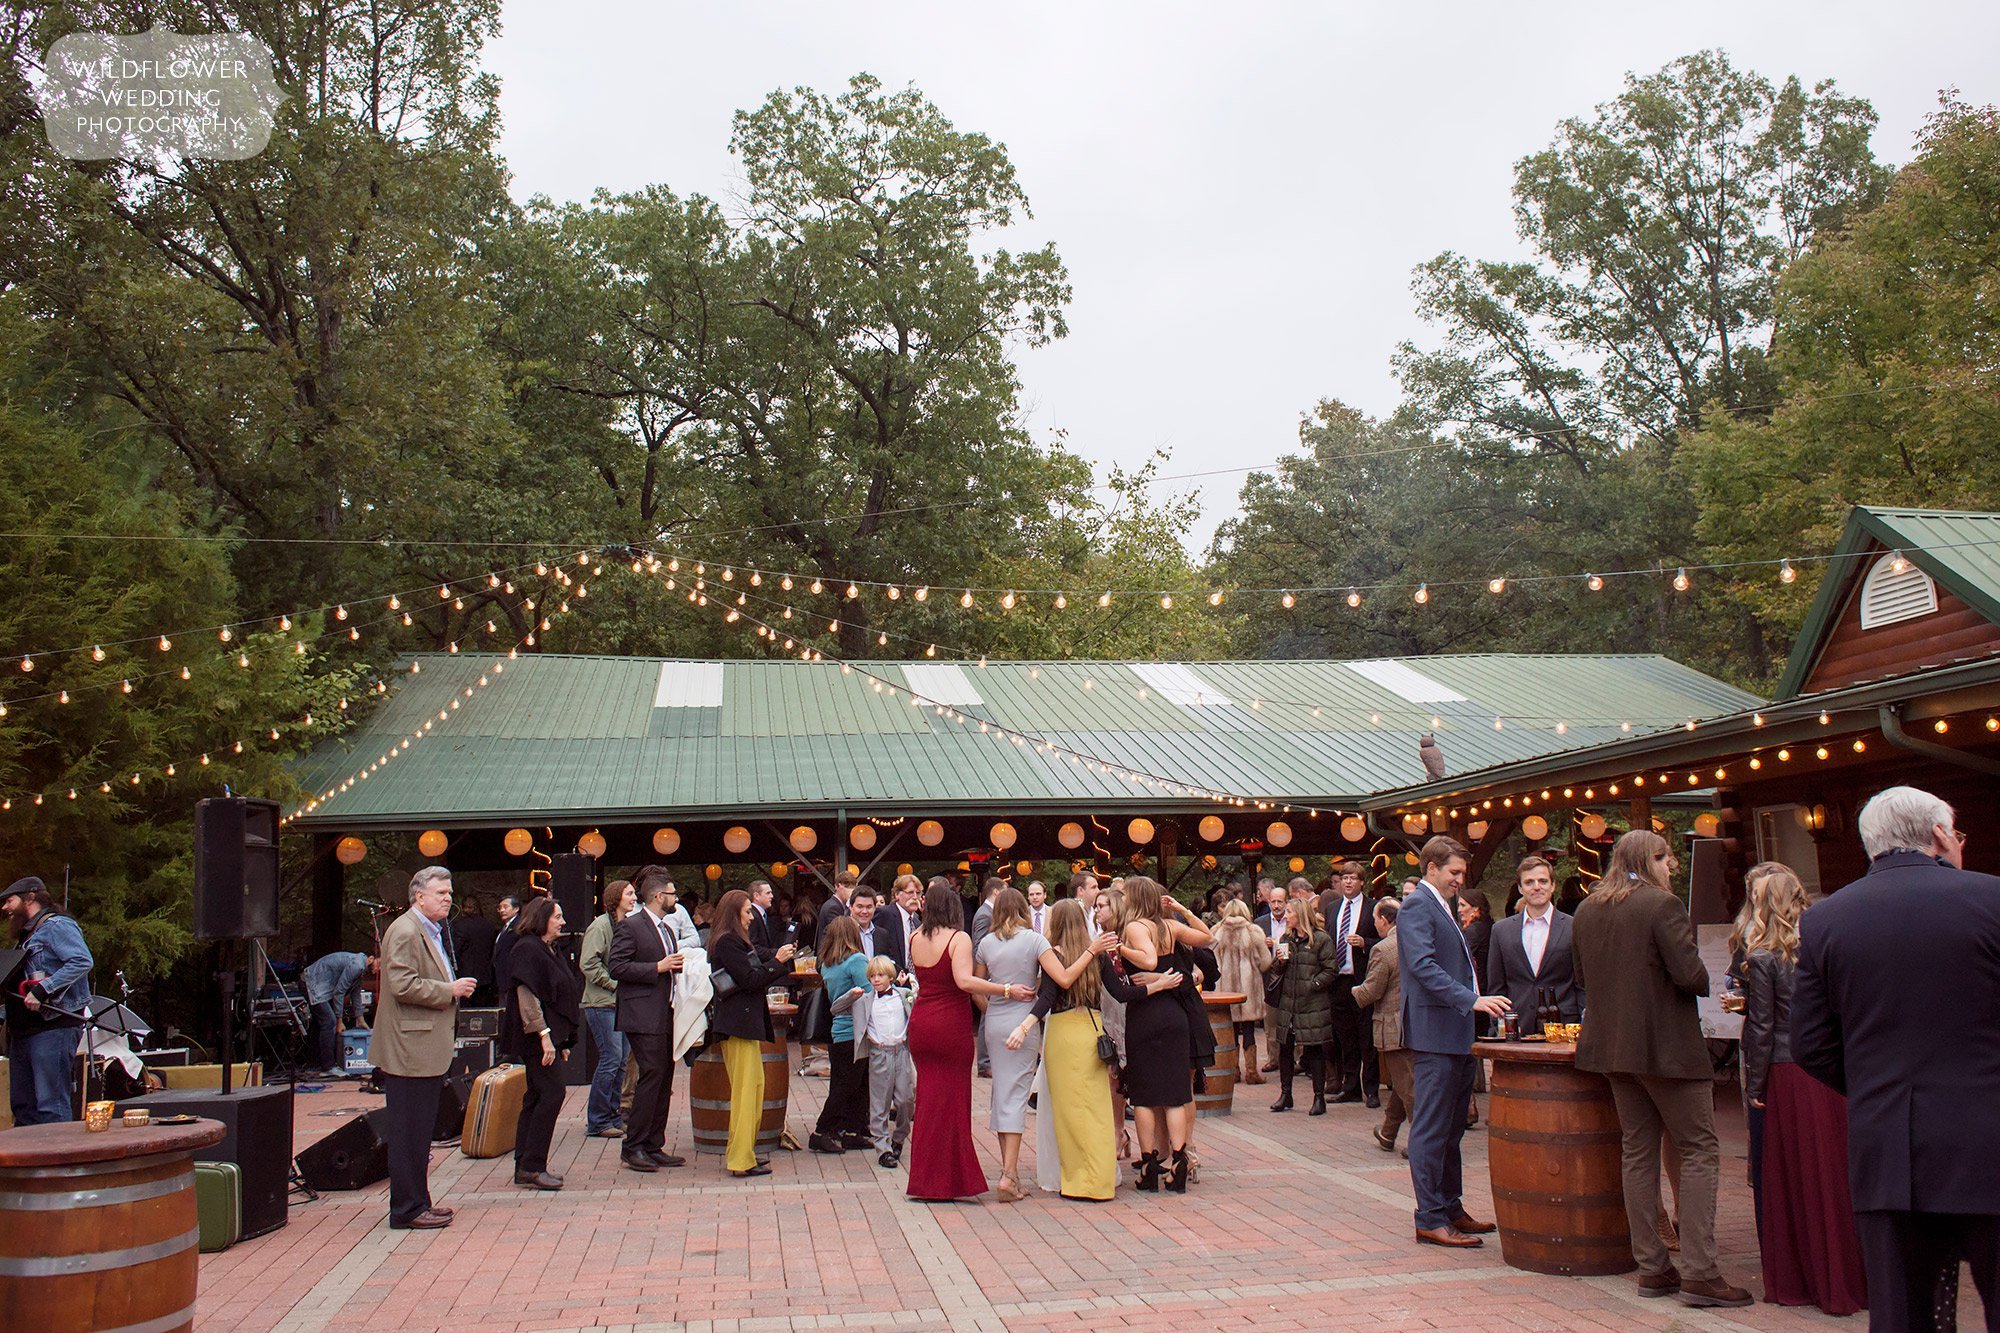 Guests enjoy an outdoor cocktail hour before entering pavilion for reception at Little Piney Lodge.